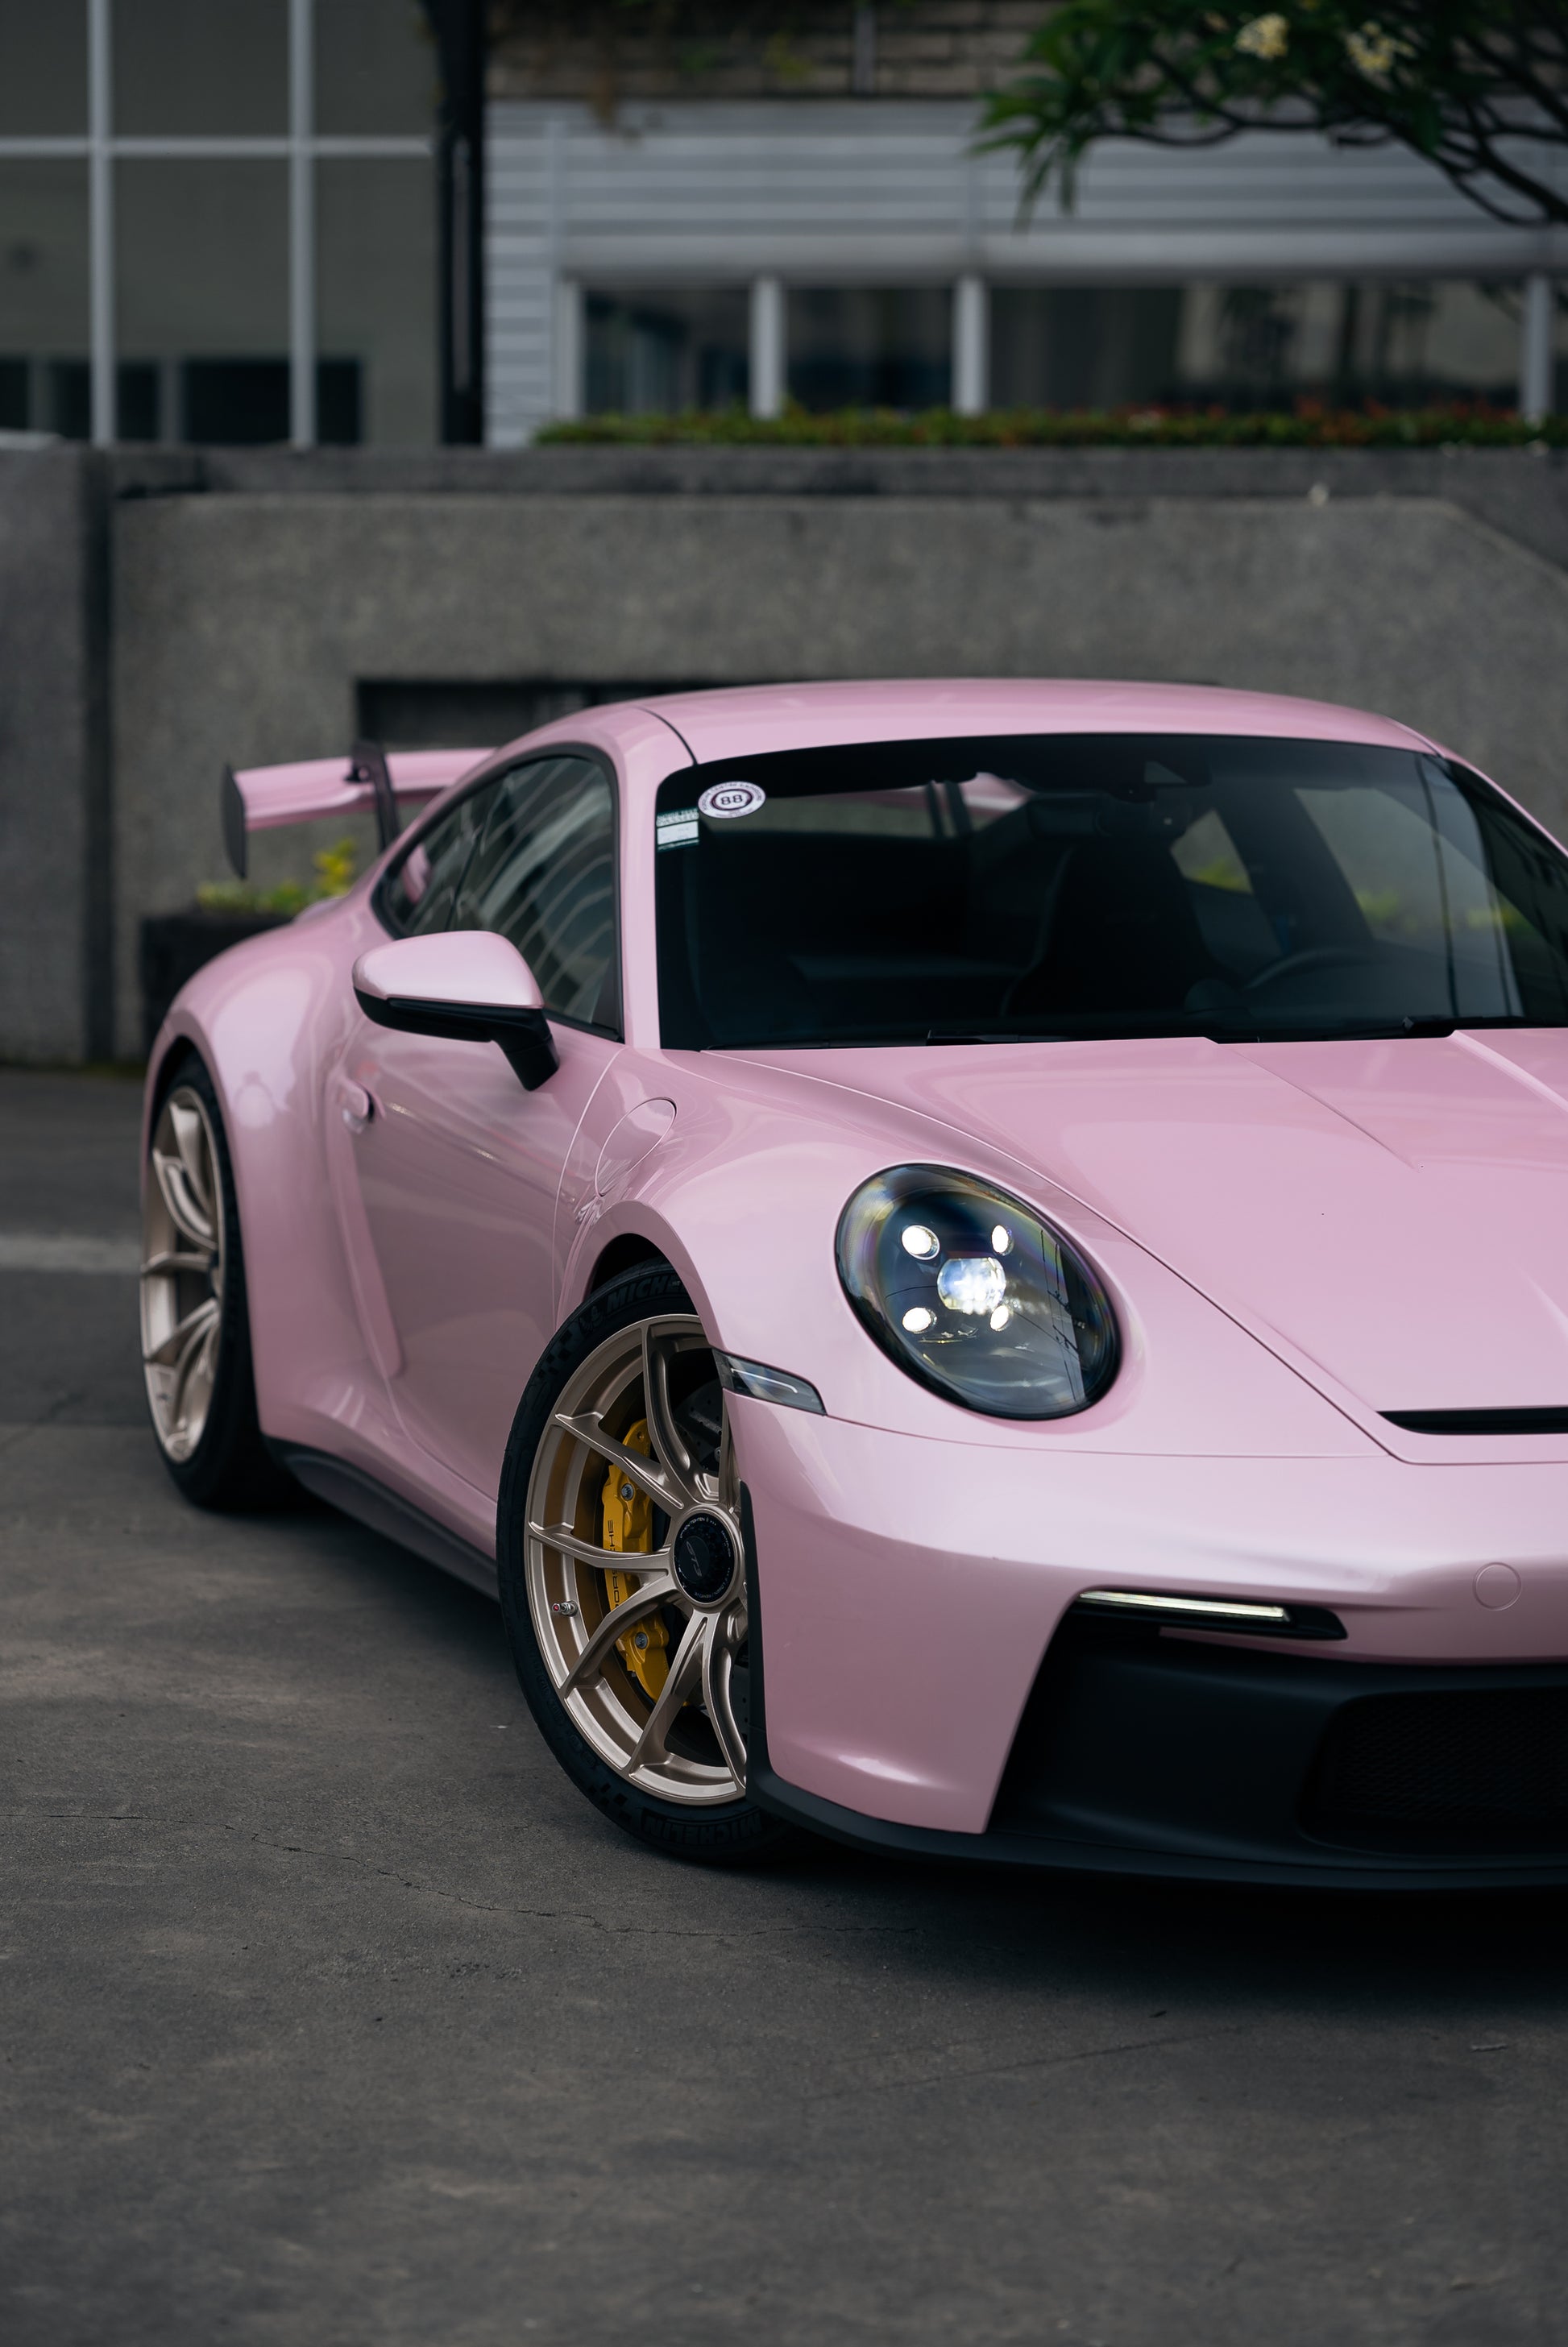 Offside front raised view of a Pink Porsche GT3 with IPE MFR-01 Magnesium wheels fitted